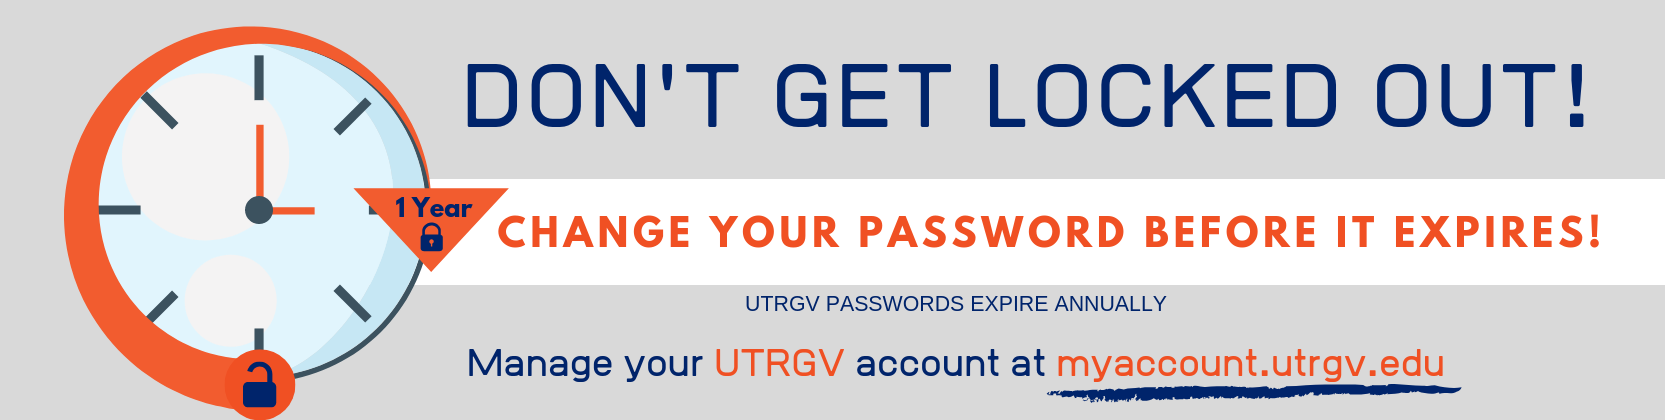 Don't get locked out! Change your password before it expires!